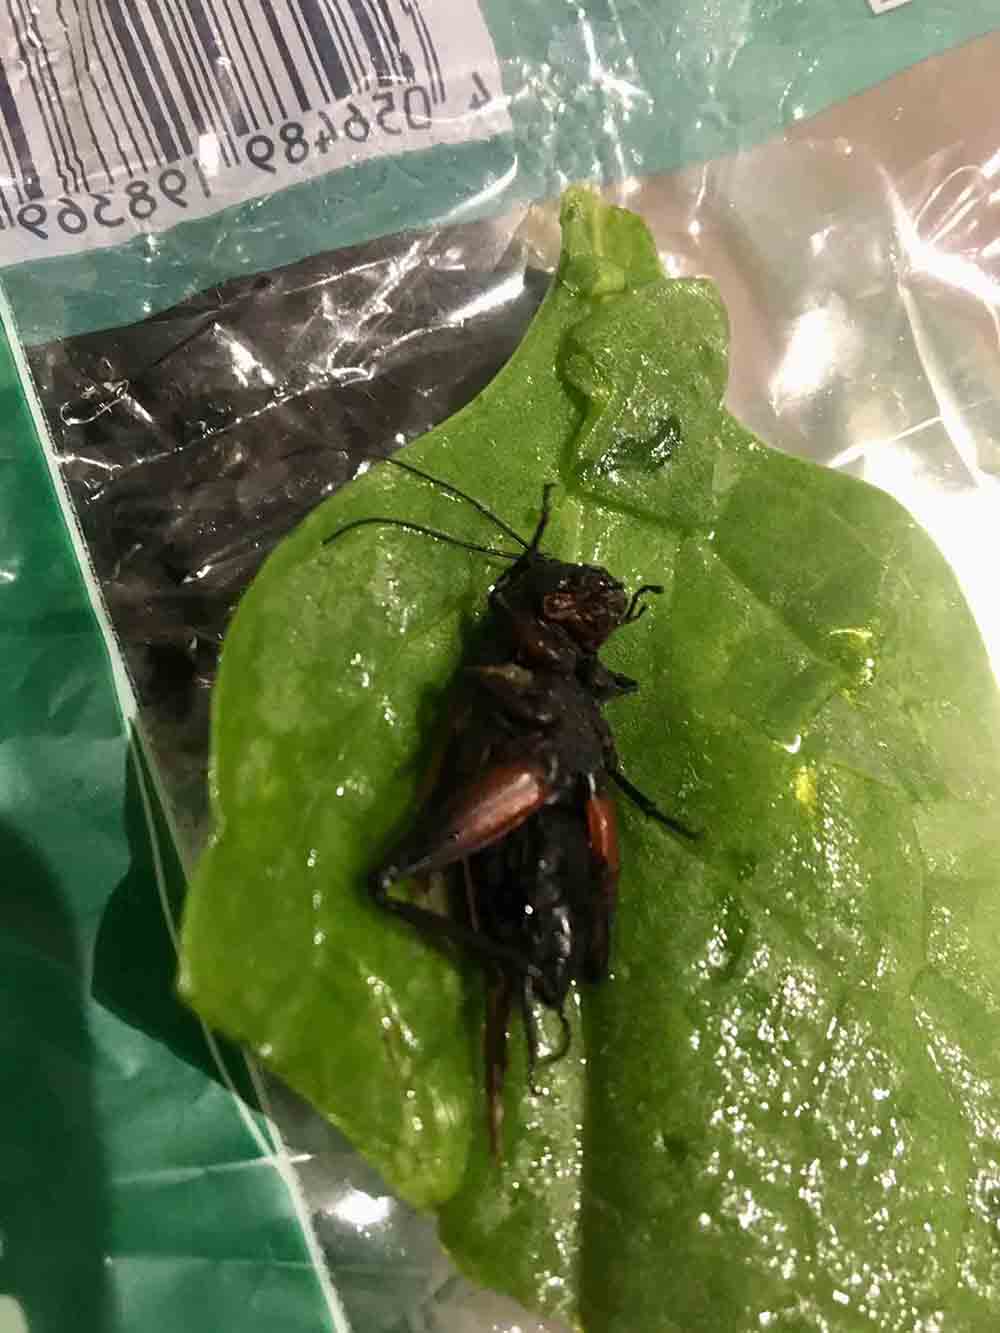 A LIDL customer has shared revolting images showing how she allegedly discovered a dead "cricket" inside her spinach. - Food and Drink News